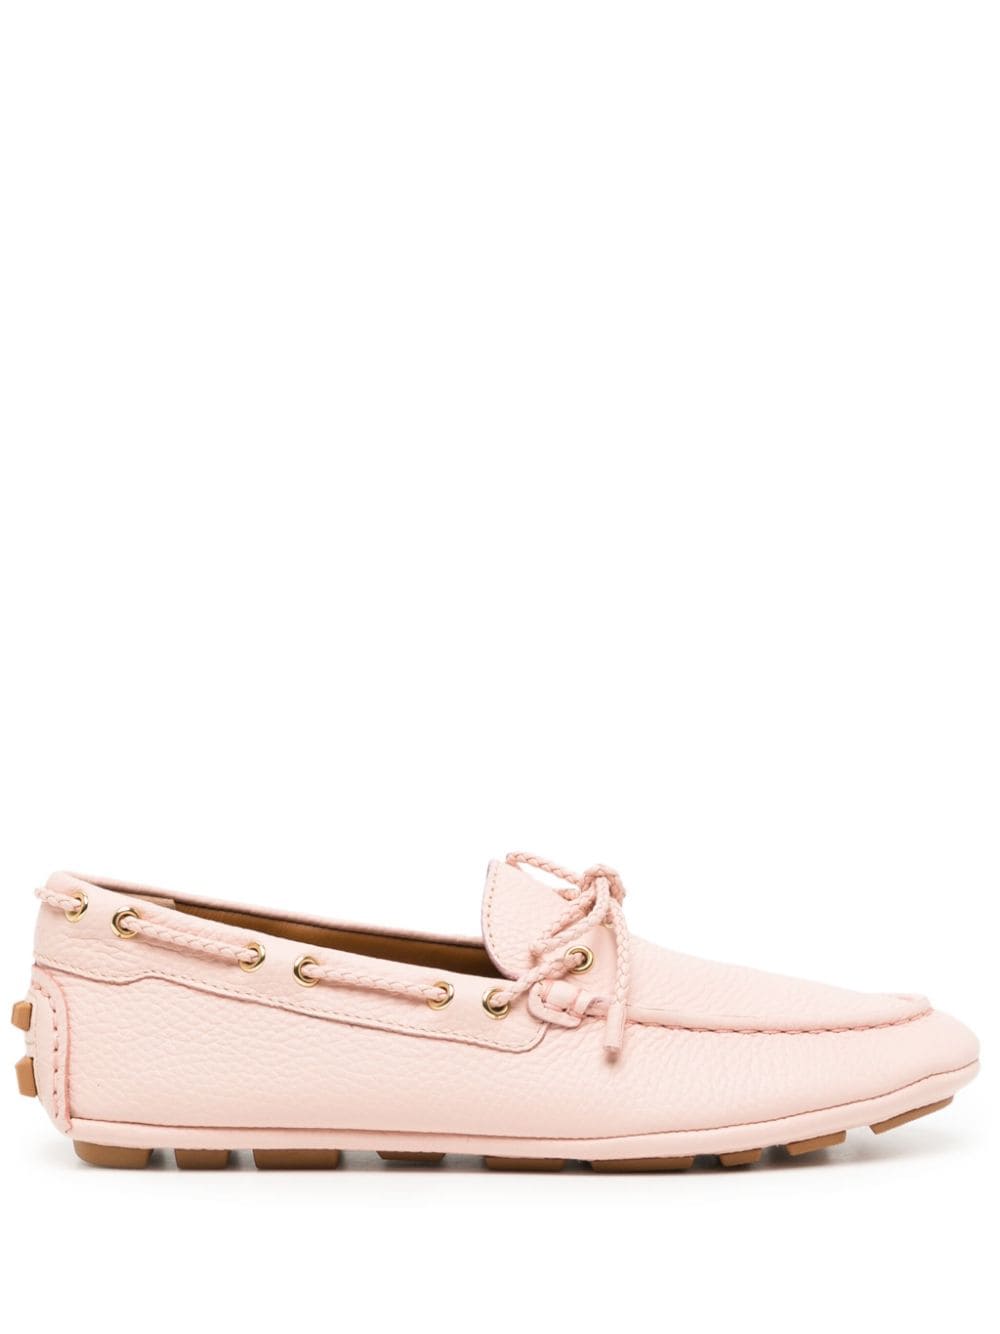 Bally leather boat loafers - Pink von Bally